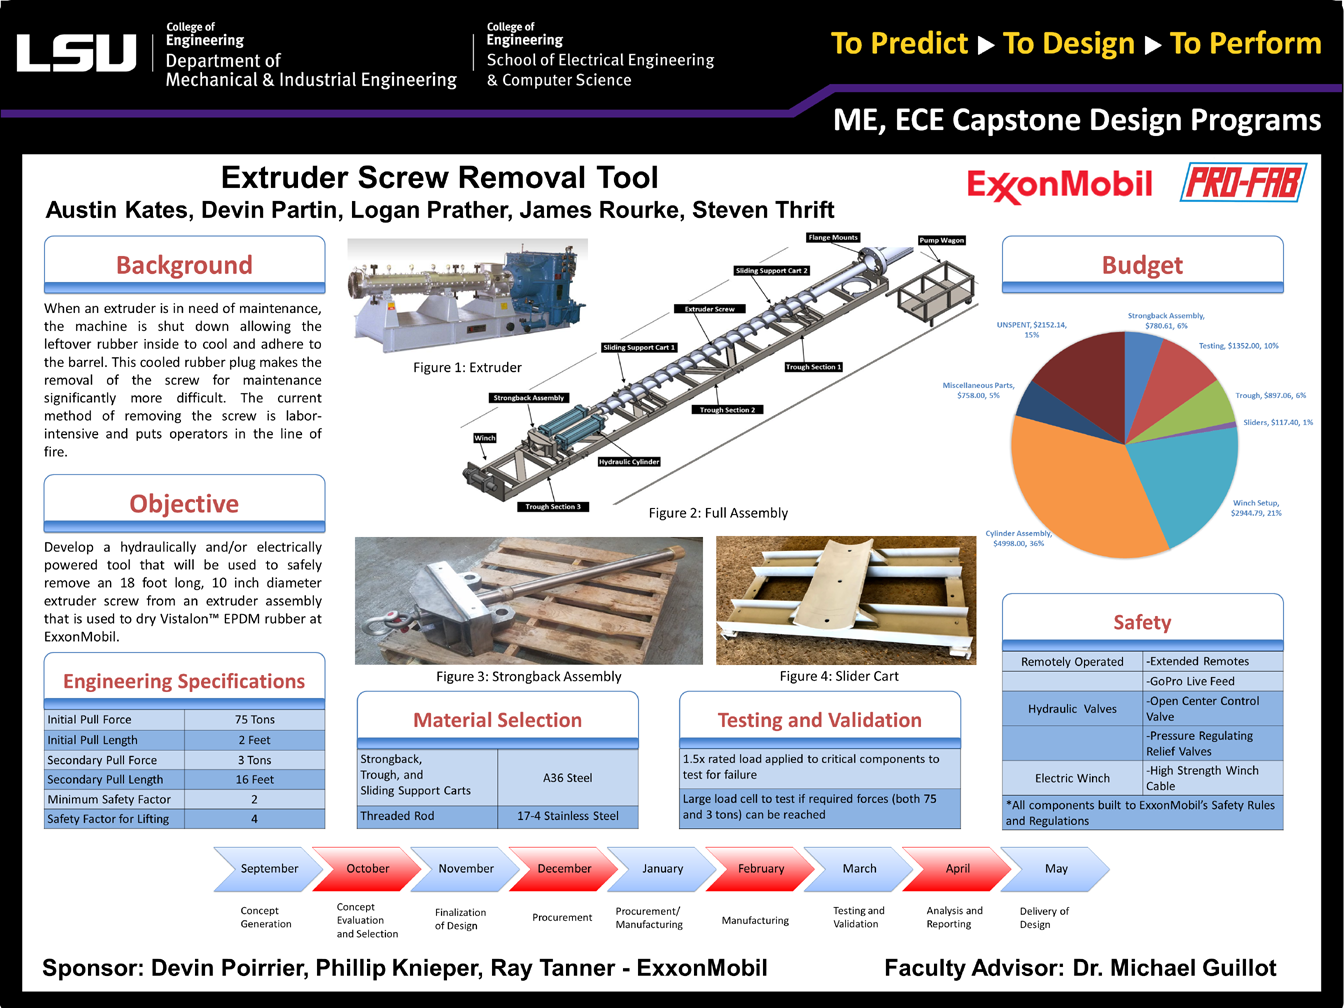 Project 40: Expander Screw Removal Tool (2019)